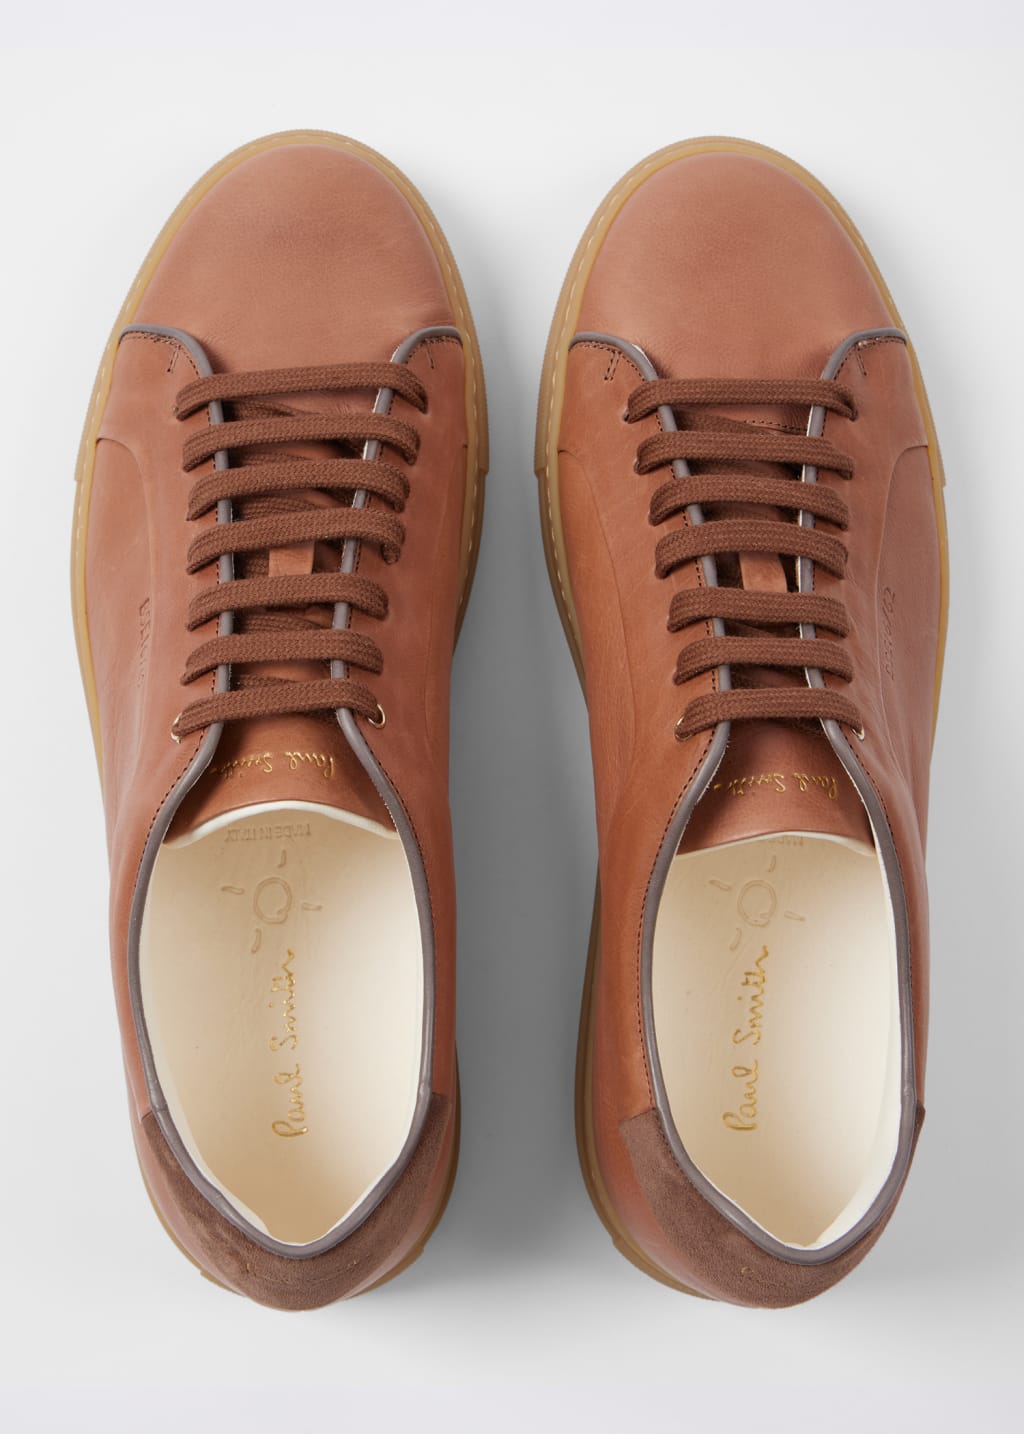 Pair View - Tan Leather 'Basso' Trainers Paul Smith